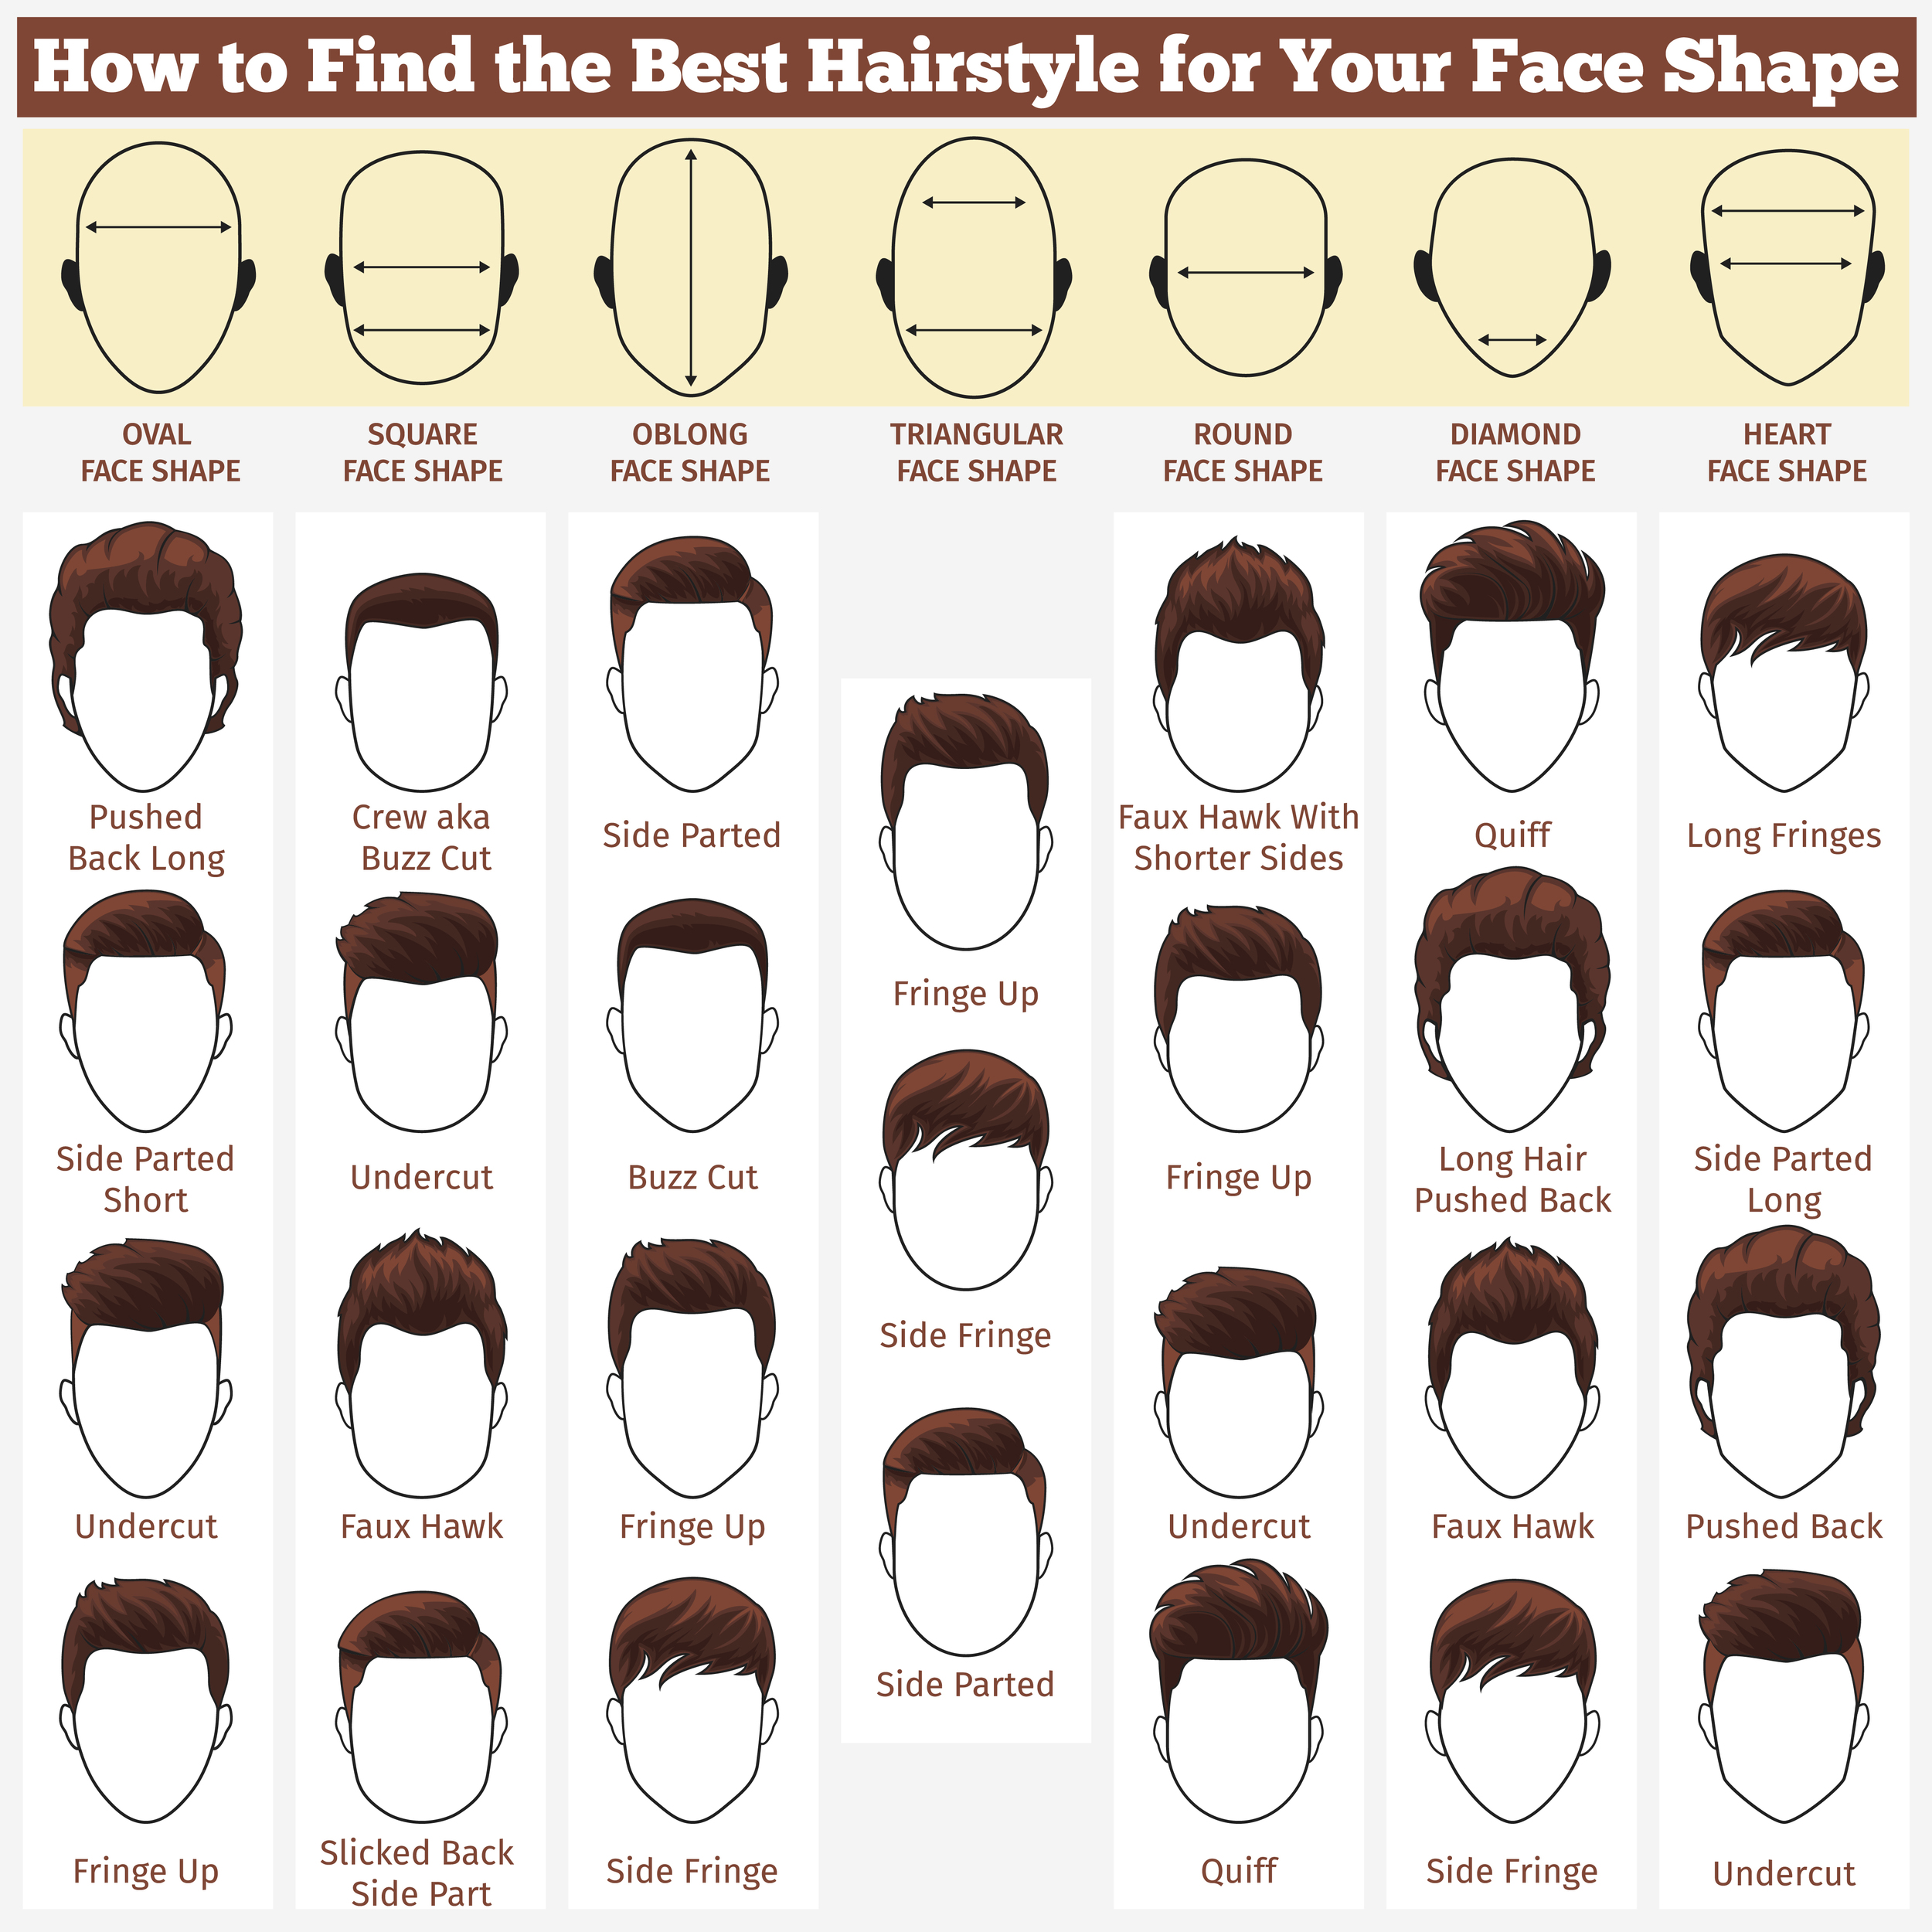 41 Amazing Hairstyles For Round Faces That Look Flattering